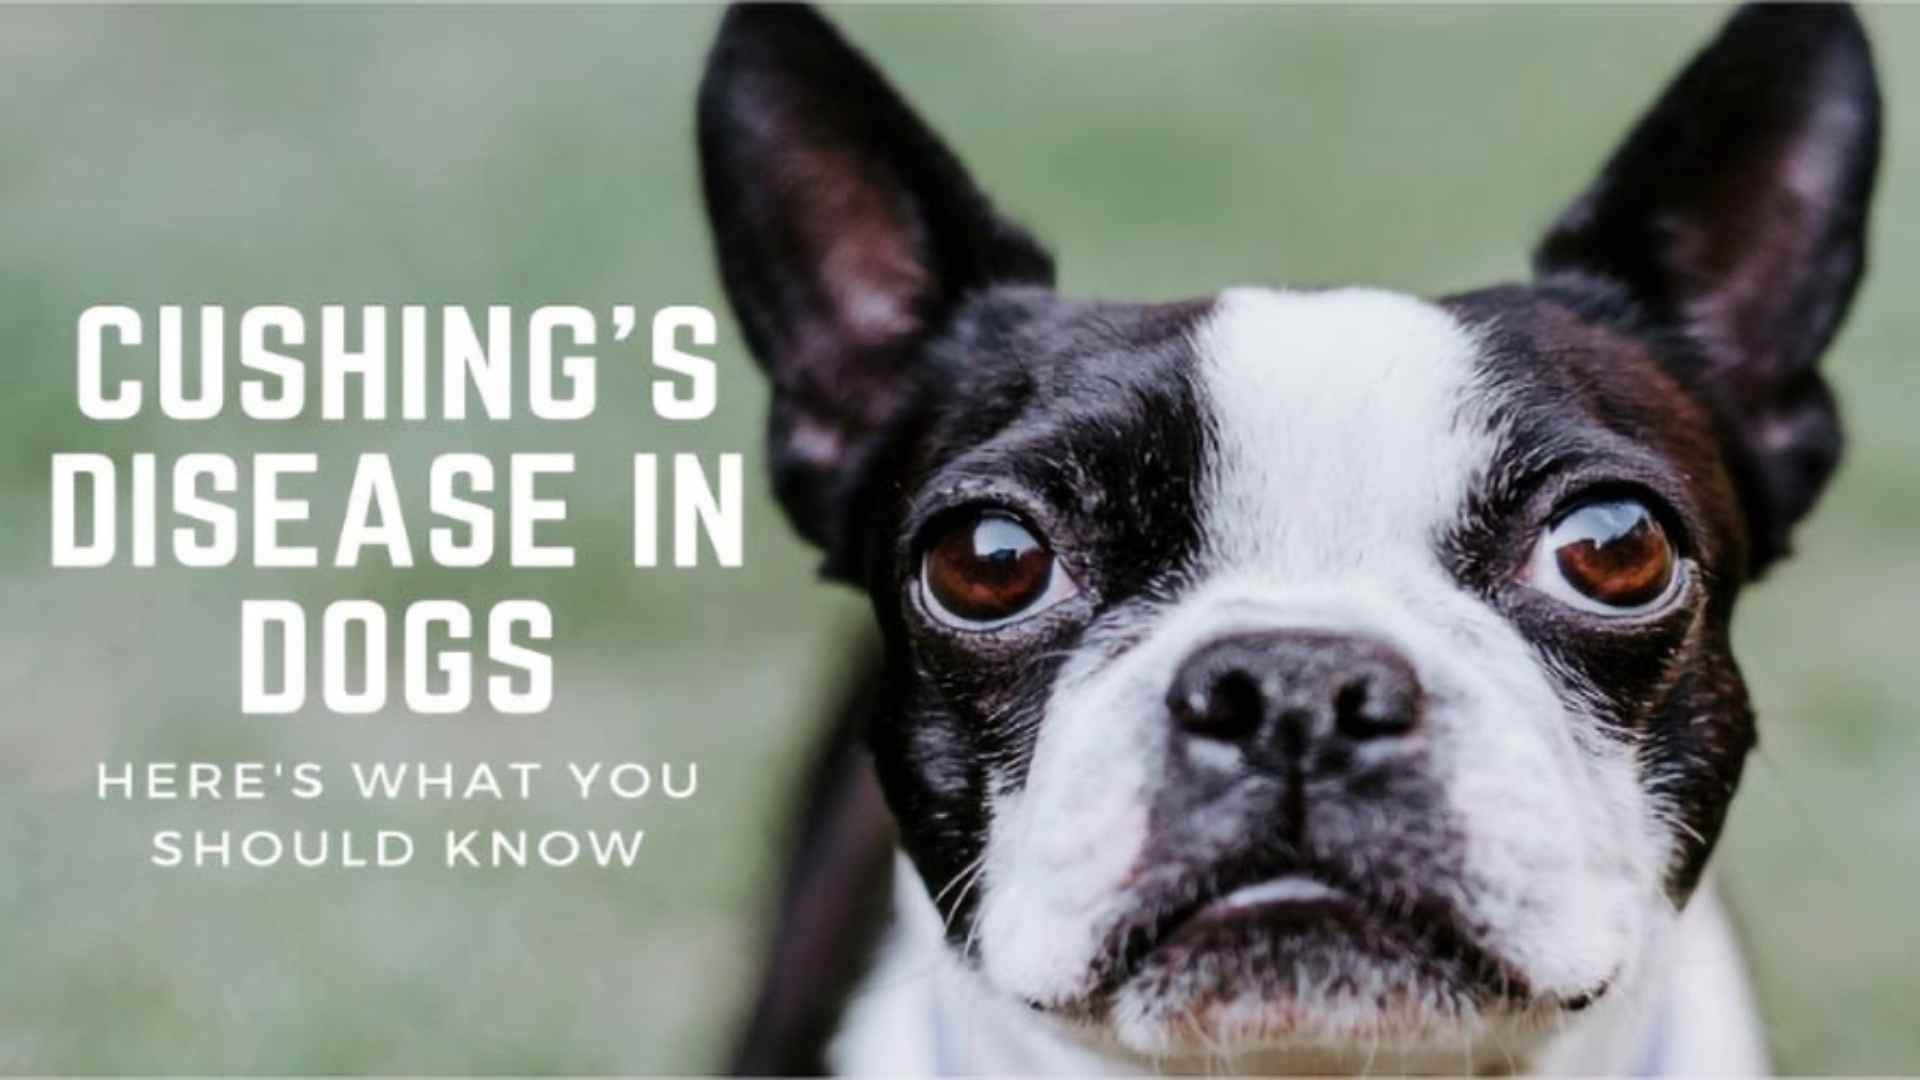 Cushing’s Disease in Dogs: Here’s What You Should Know